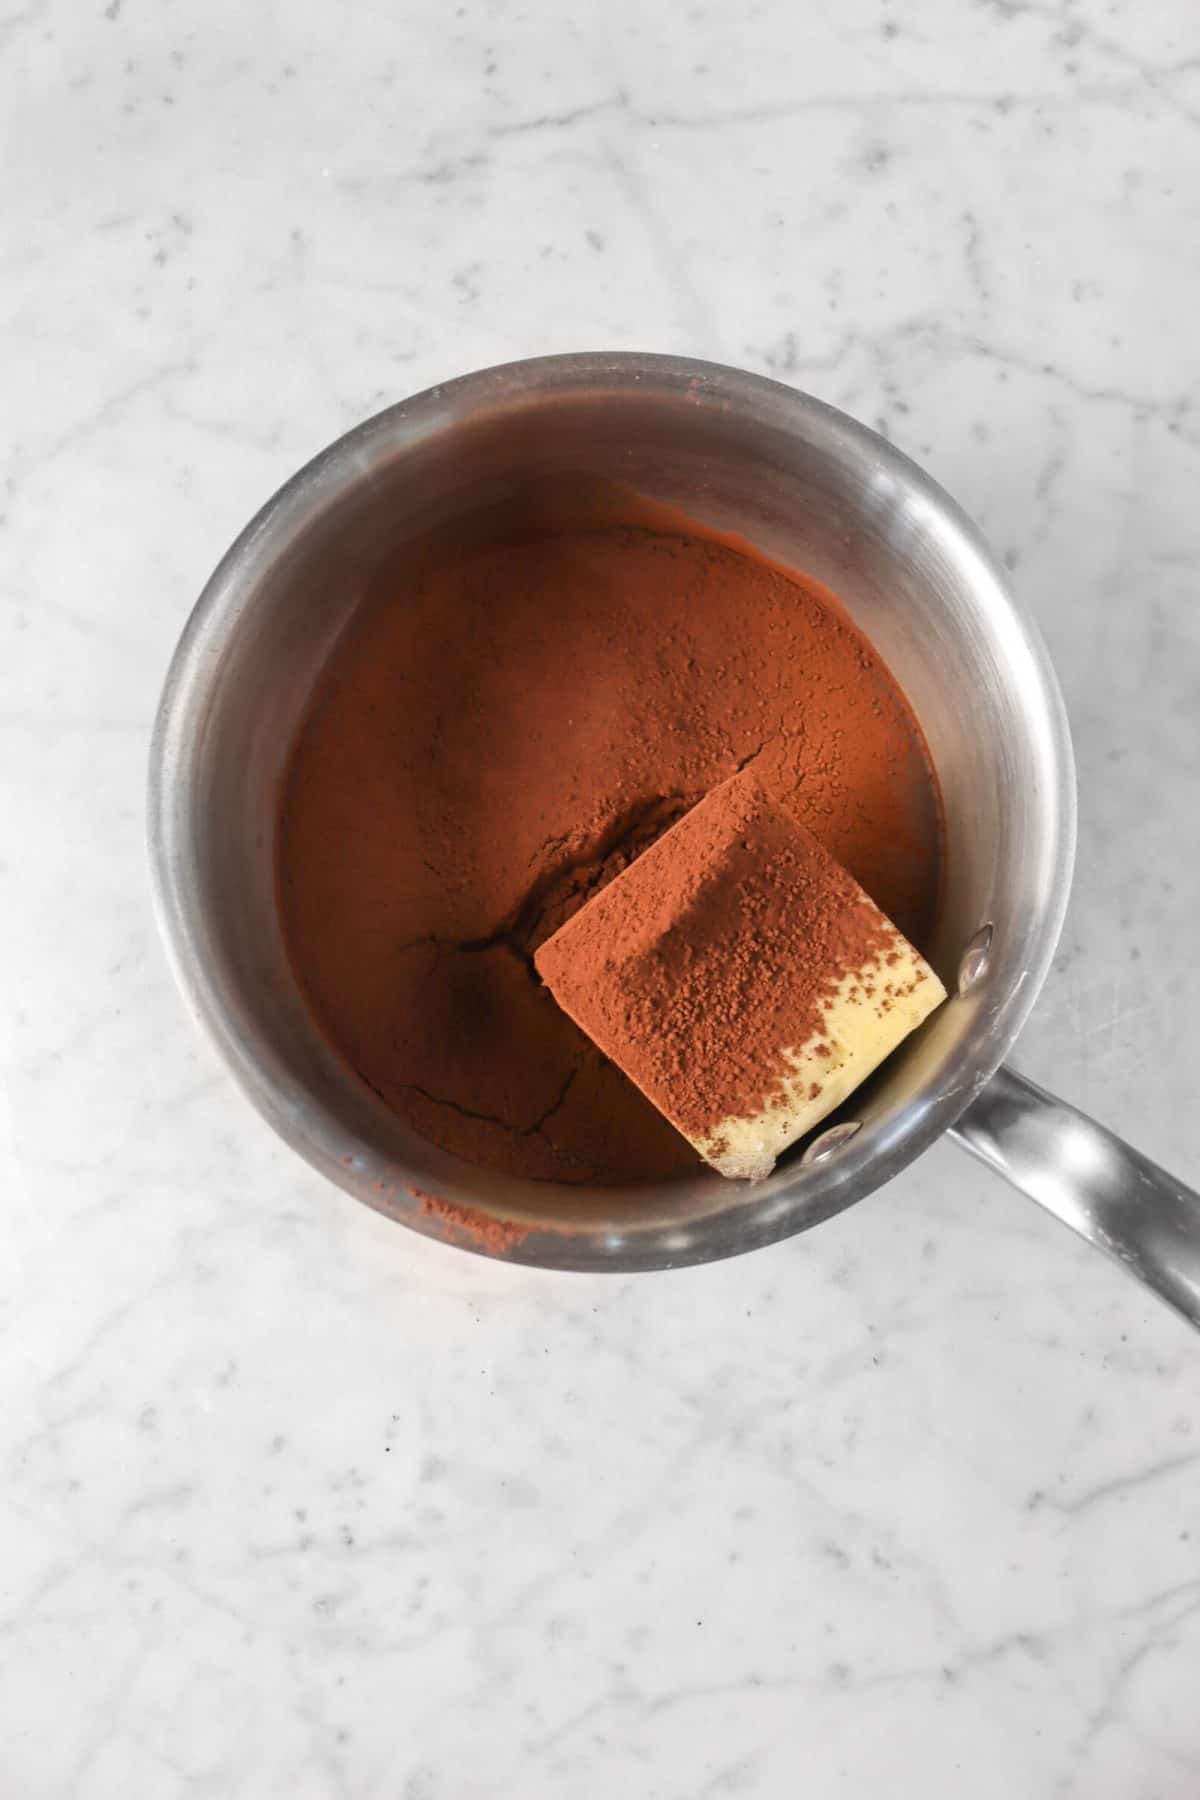 butter, water, and cocoa powder in a small pot